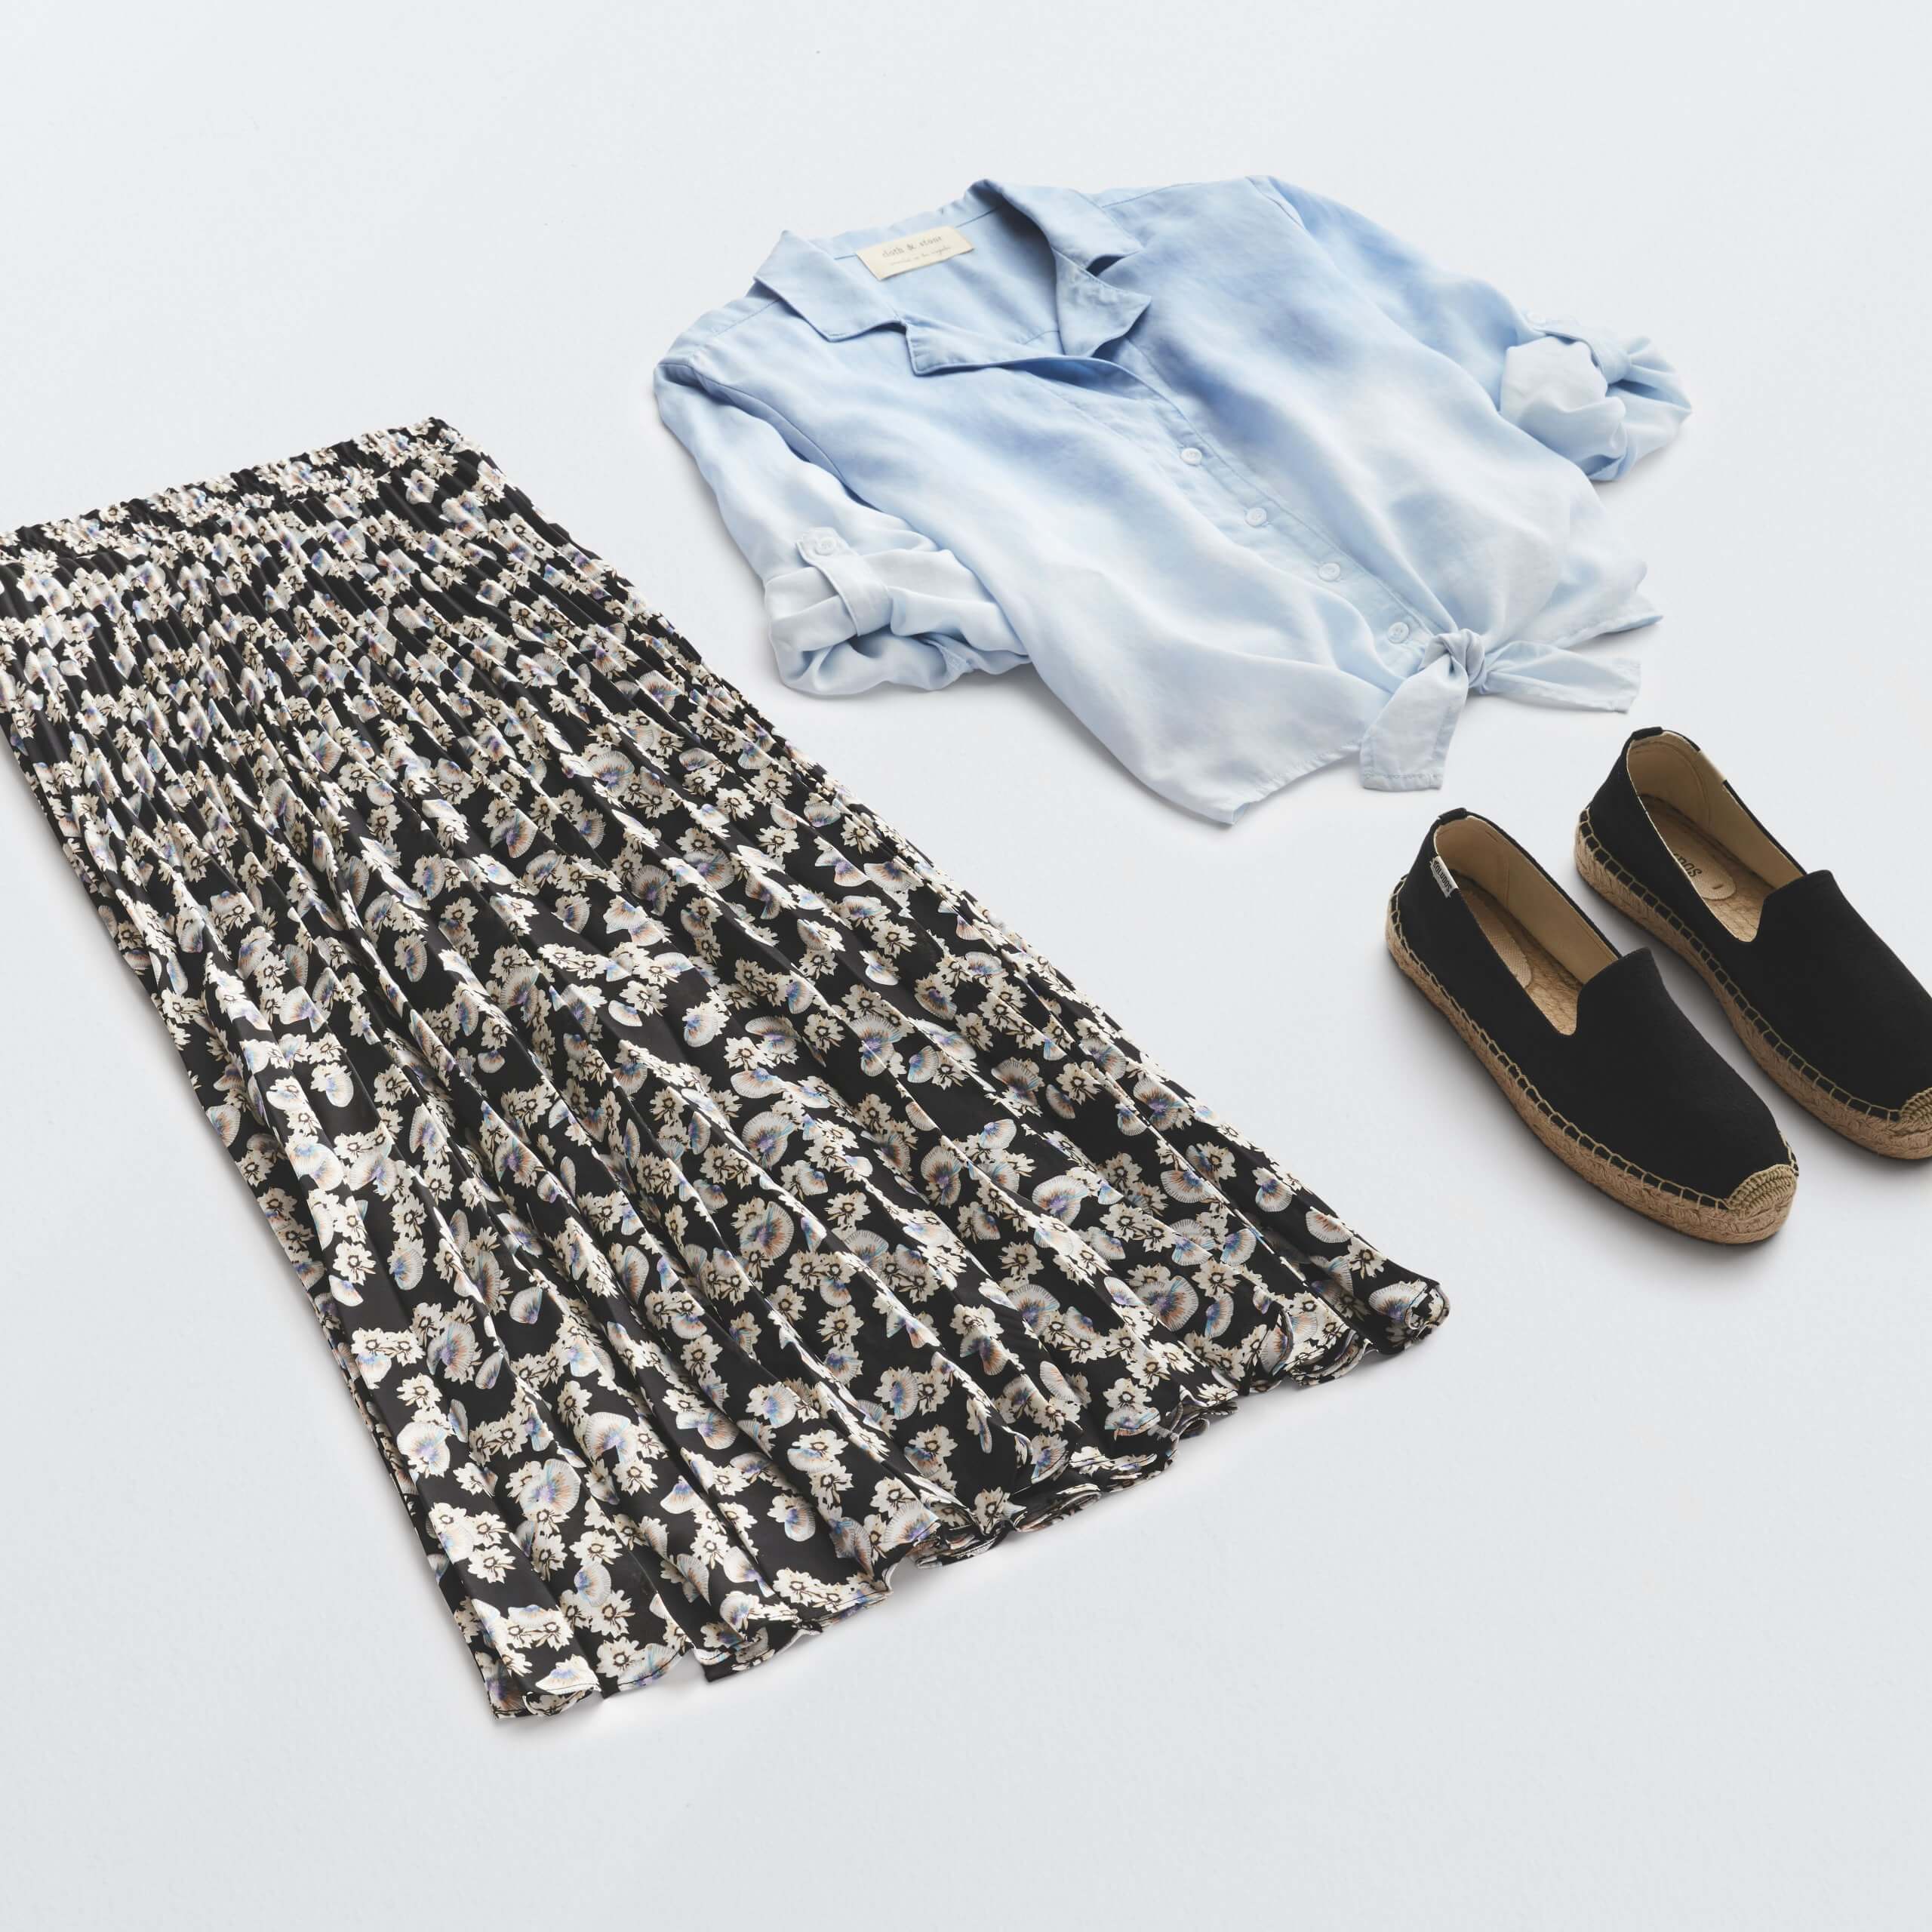 Stitch Fix Women’s outfit laydown featuring floral pleated midi skirt, chambray button-front shirt and black espadrille flats.